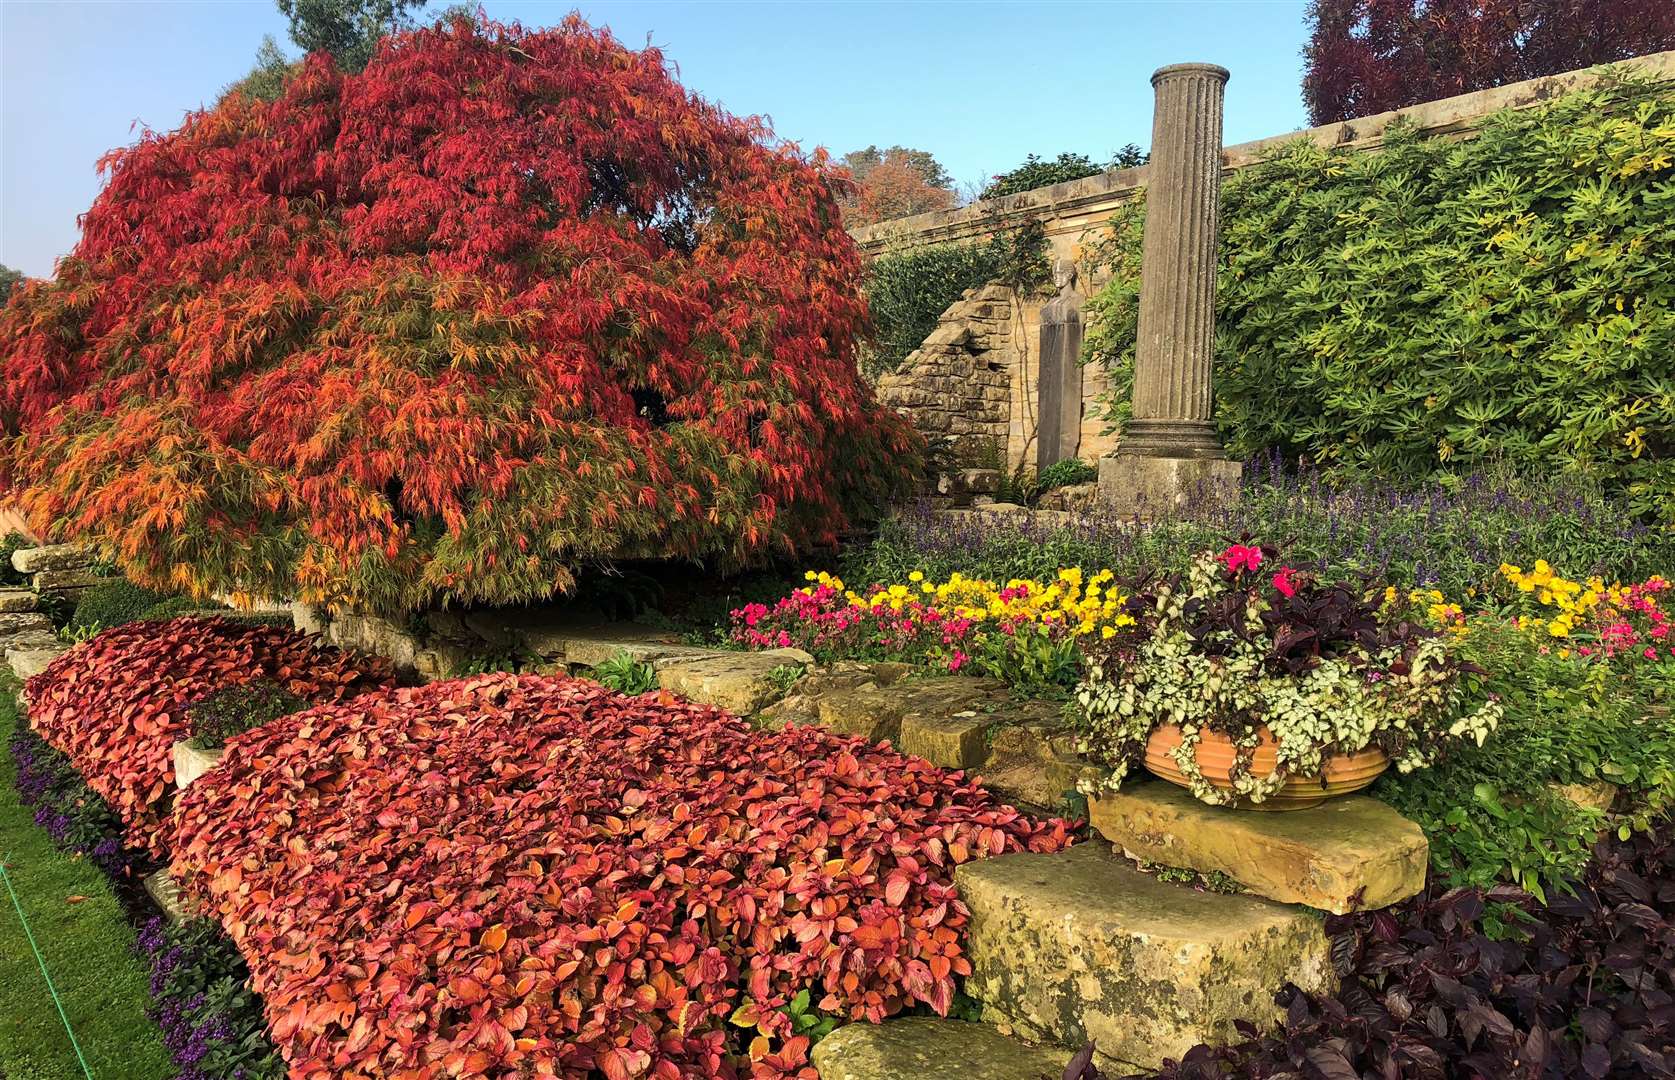 The castle has award-winning gardens. Picture: Hever Castle and Gardens